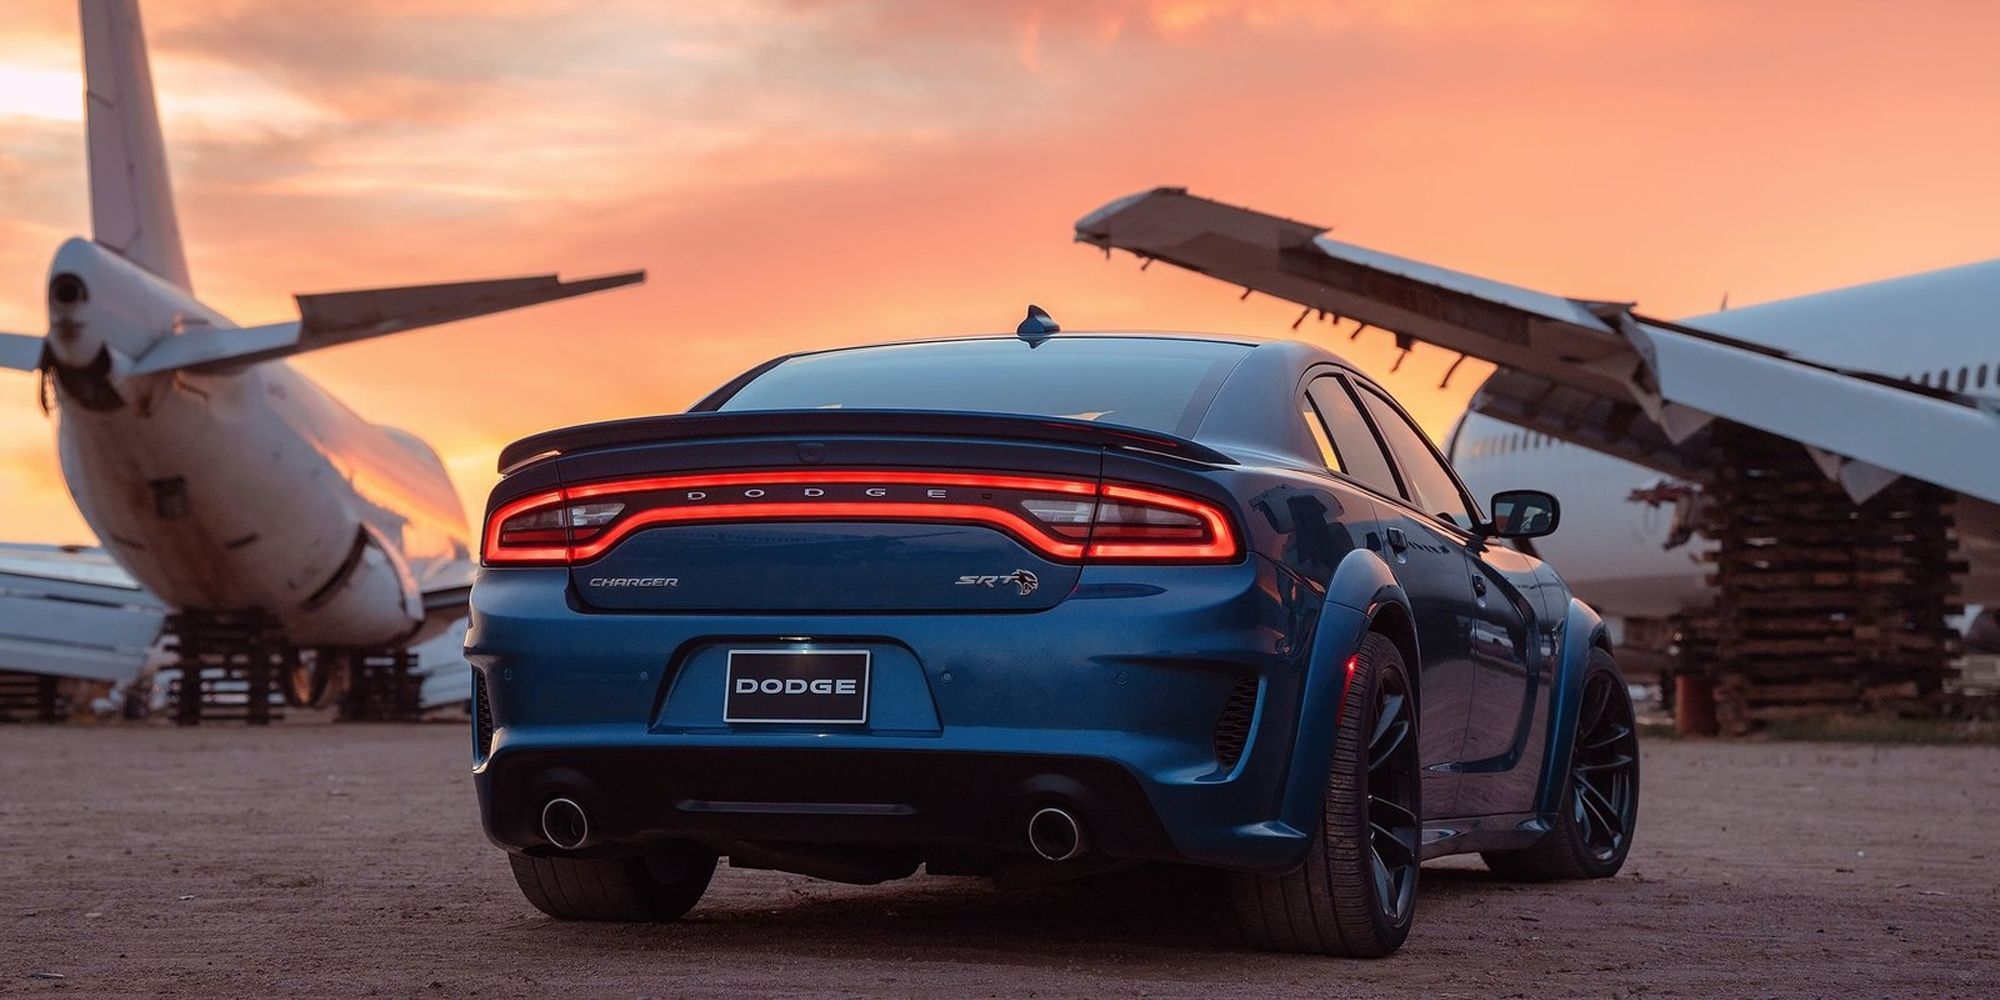 The rear of the Charger Hellcat Widebody